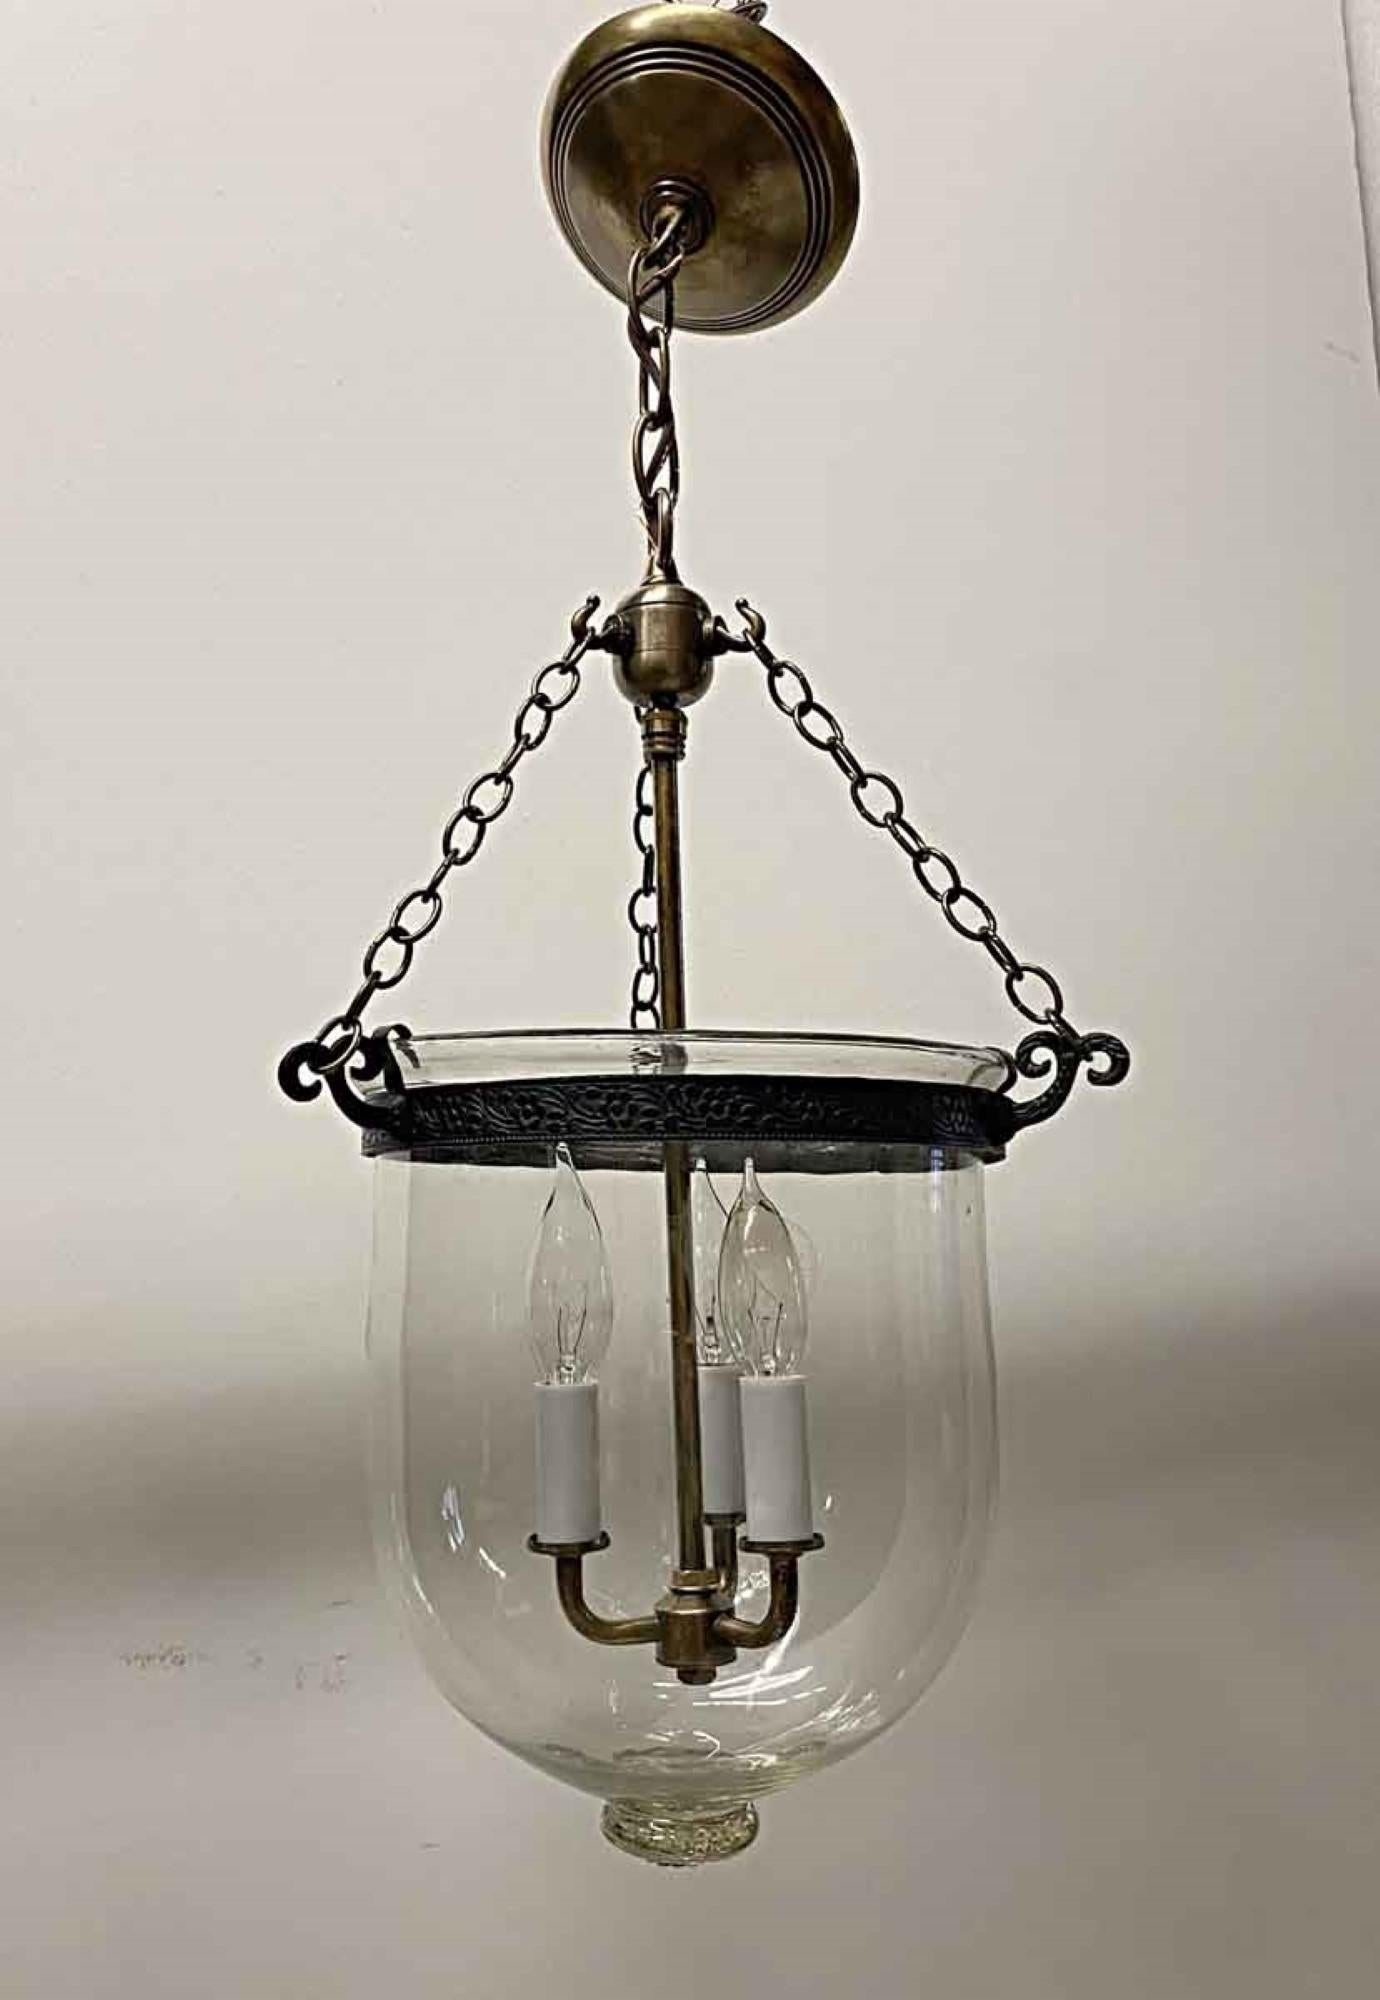 1890s English hand blown clear glass whale oil bell jar lantern. This fixture now features newly made brass hardware and three candelabra lights inside. This can be seen at our 400 Gilligan St location in Scranton. PA.